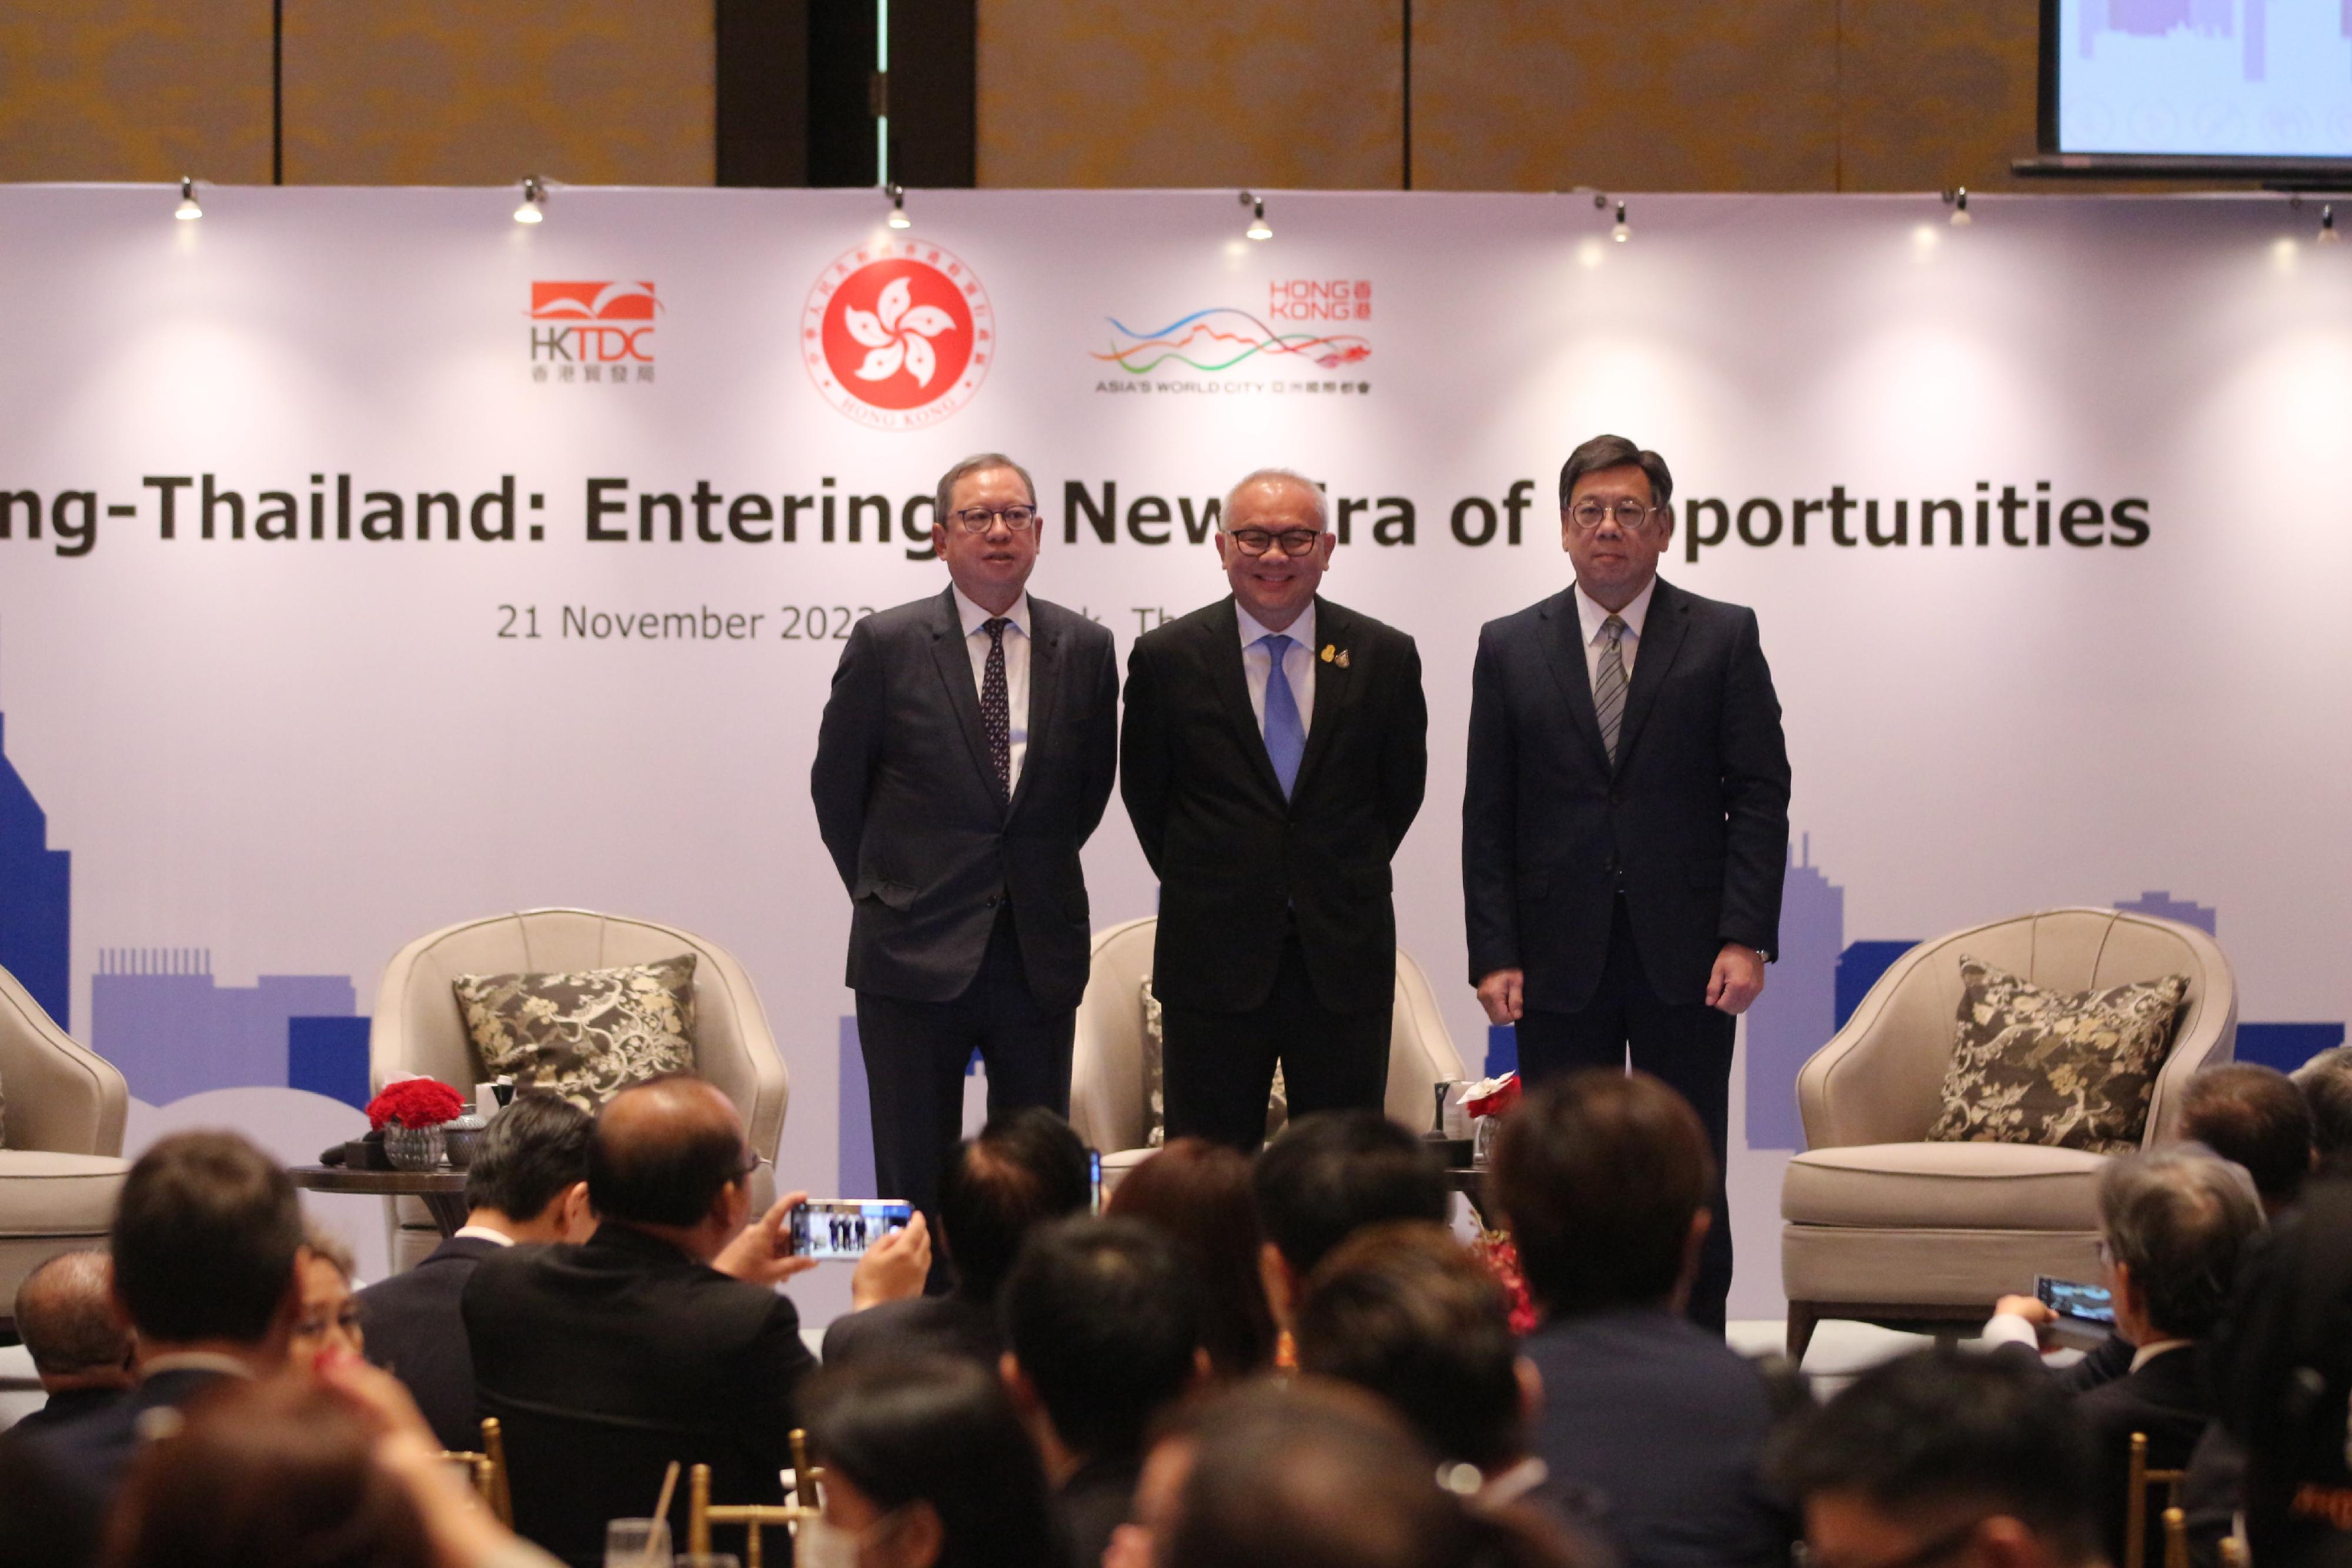 The Secretary for Commerce and Economic Development, Mr Algernon Yau, and a Hong Kong business delegation shared with Thai business sectors Hong Kong’s favourable business environment and immense opportunities at a business seminar-cum-lunch in Bangkok, Thailand, today (November 21). Mr Yau (right) is pictured with Deputy Prime Minister and Minister of Energy of Thailand, Mr Supattanapong Punmeechaow (centre), and the Chairman of the Hong Kong Trade Development Council, Dr Peter Lam (left).